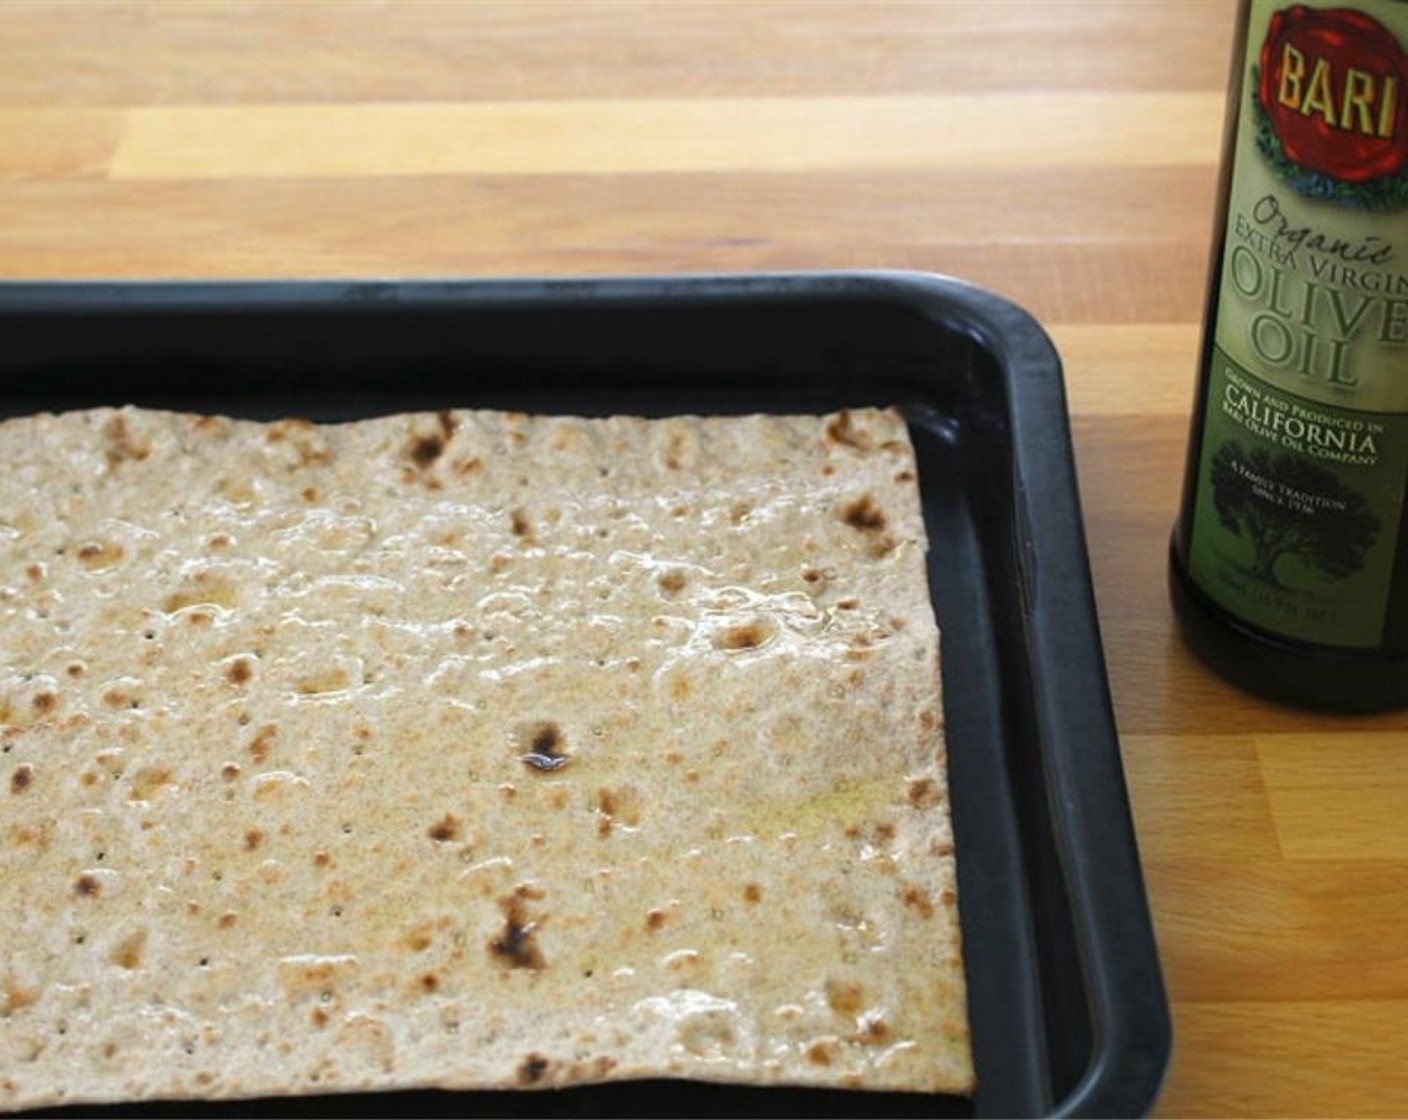 step 2 Top the Lavash (1) with Olive Oil (1 tsp) and brush over surface. Sprinkle with Salt (to taste). Top with Apple (1), Dried Rosemary (1/4 tsp), Ground Black Pepper (to taste), and Cheddar Cheese (1/4 cup).